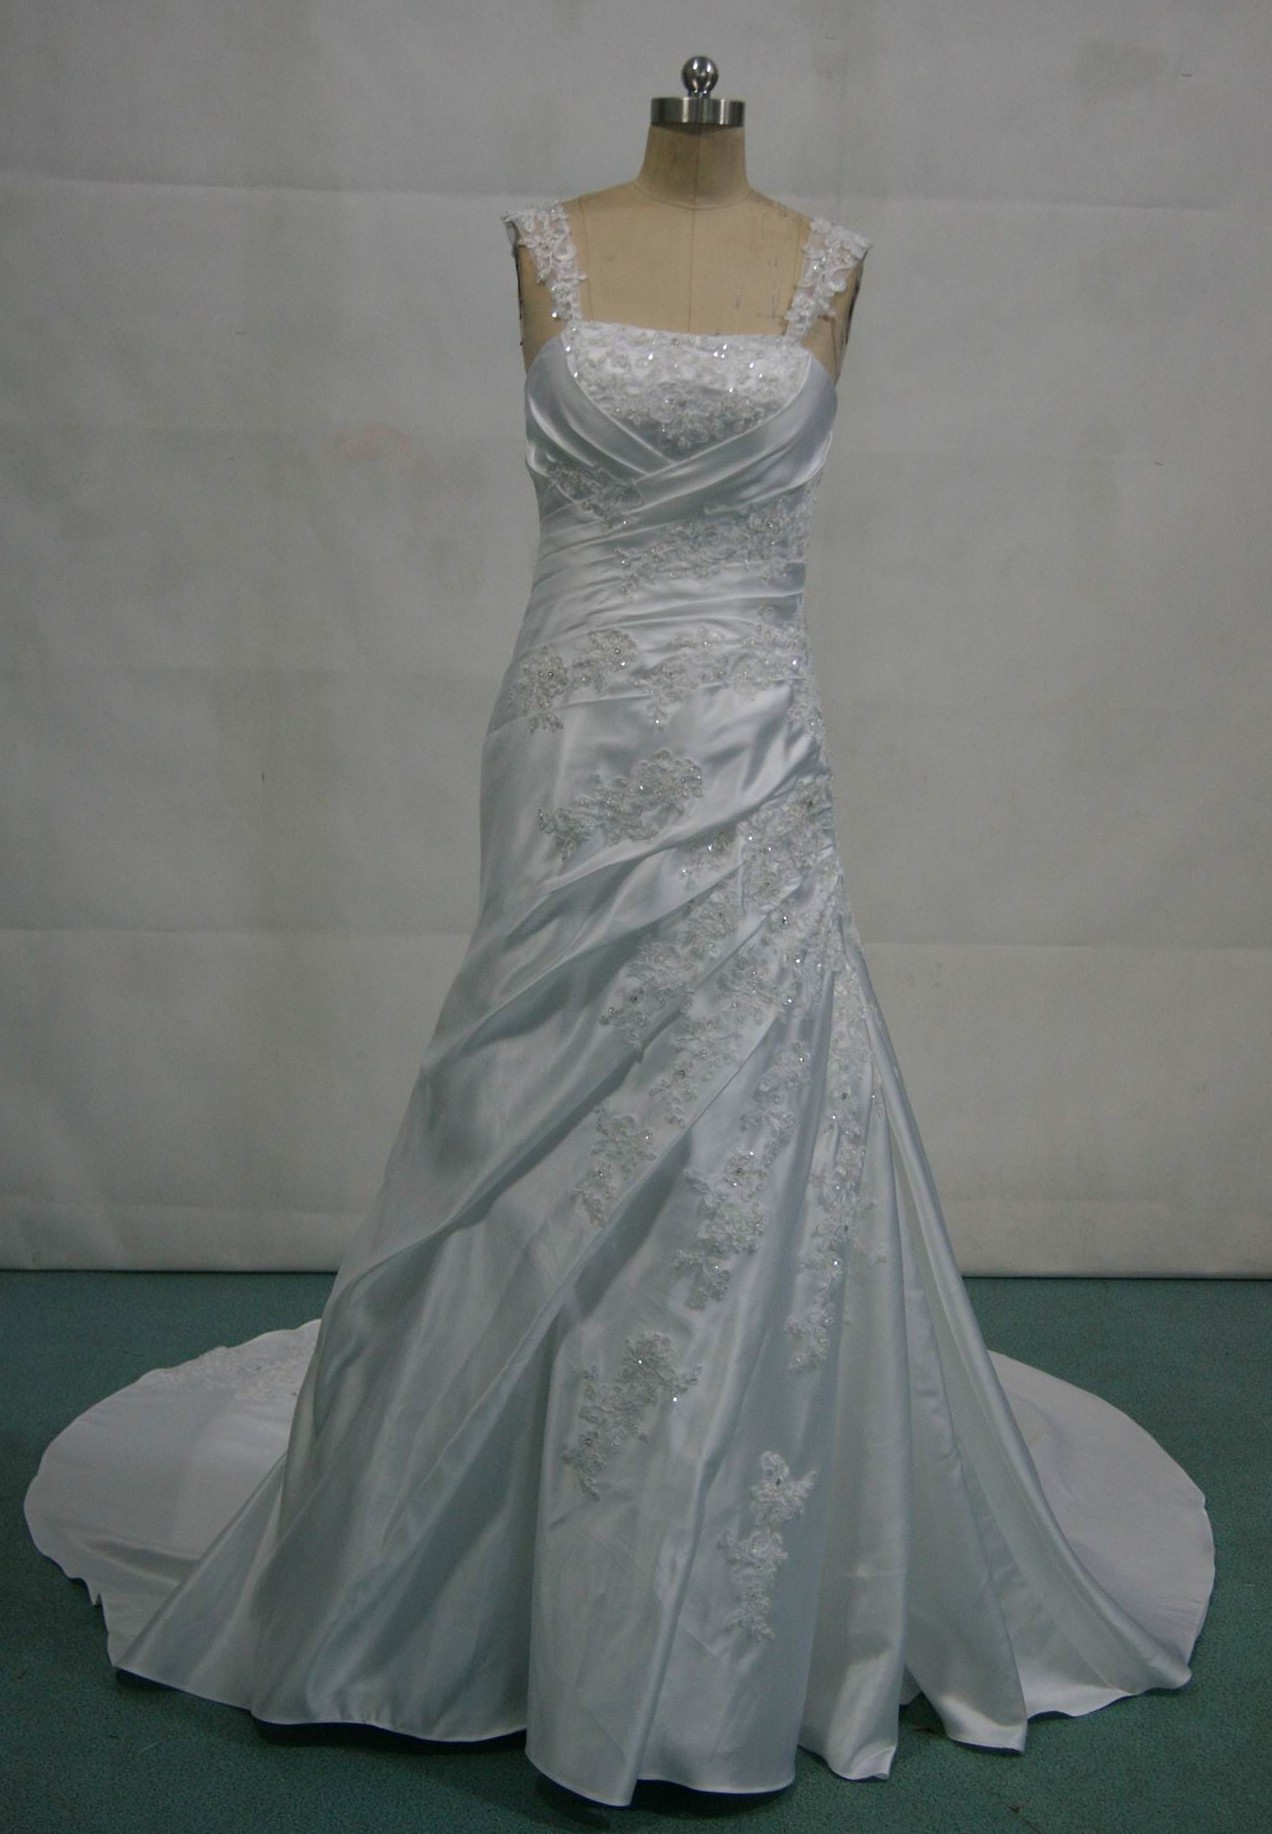 Draped A-line wedding gown